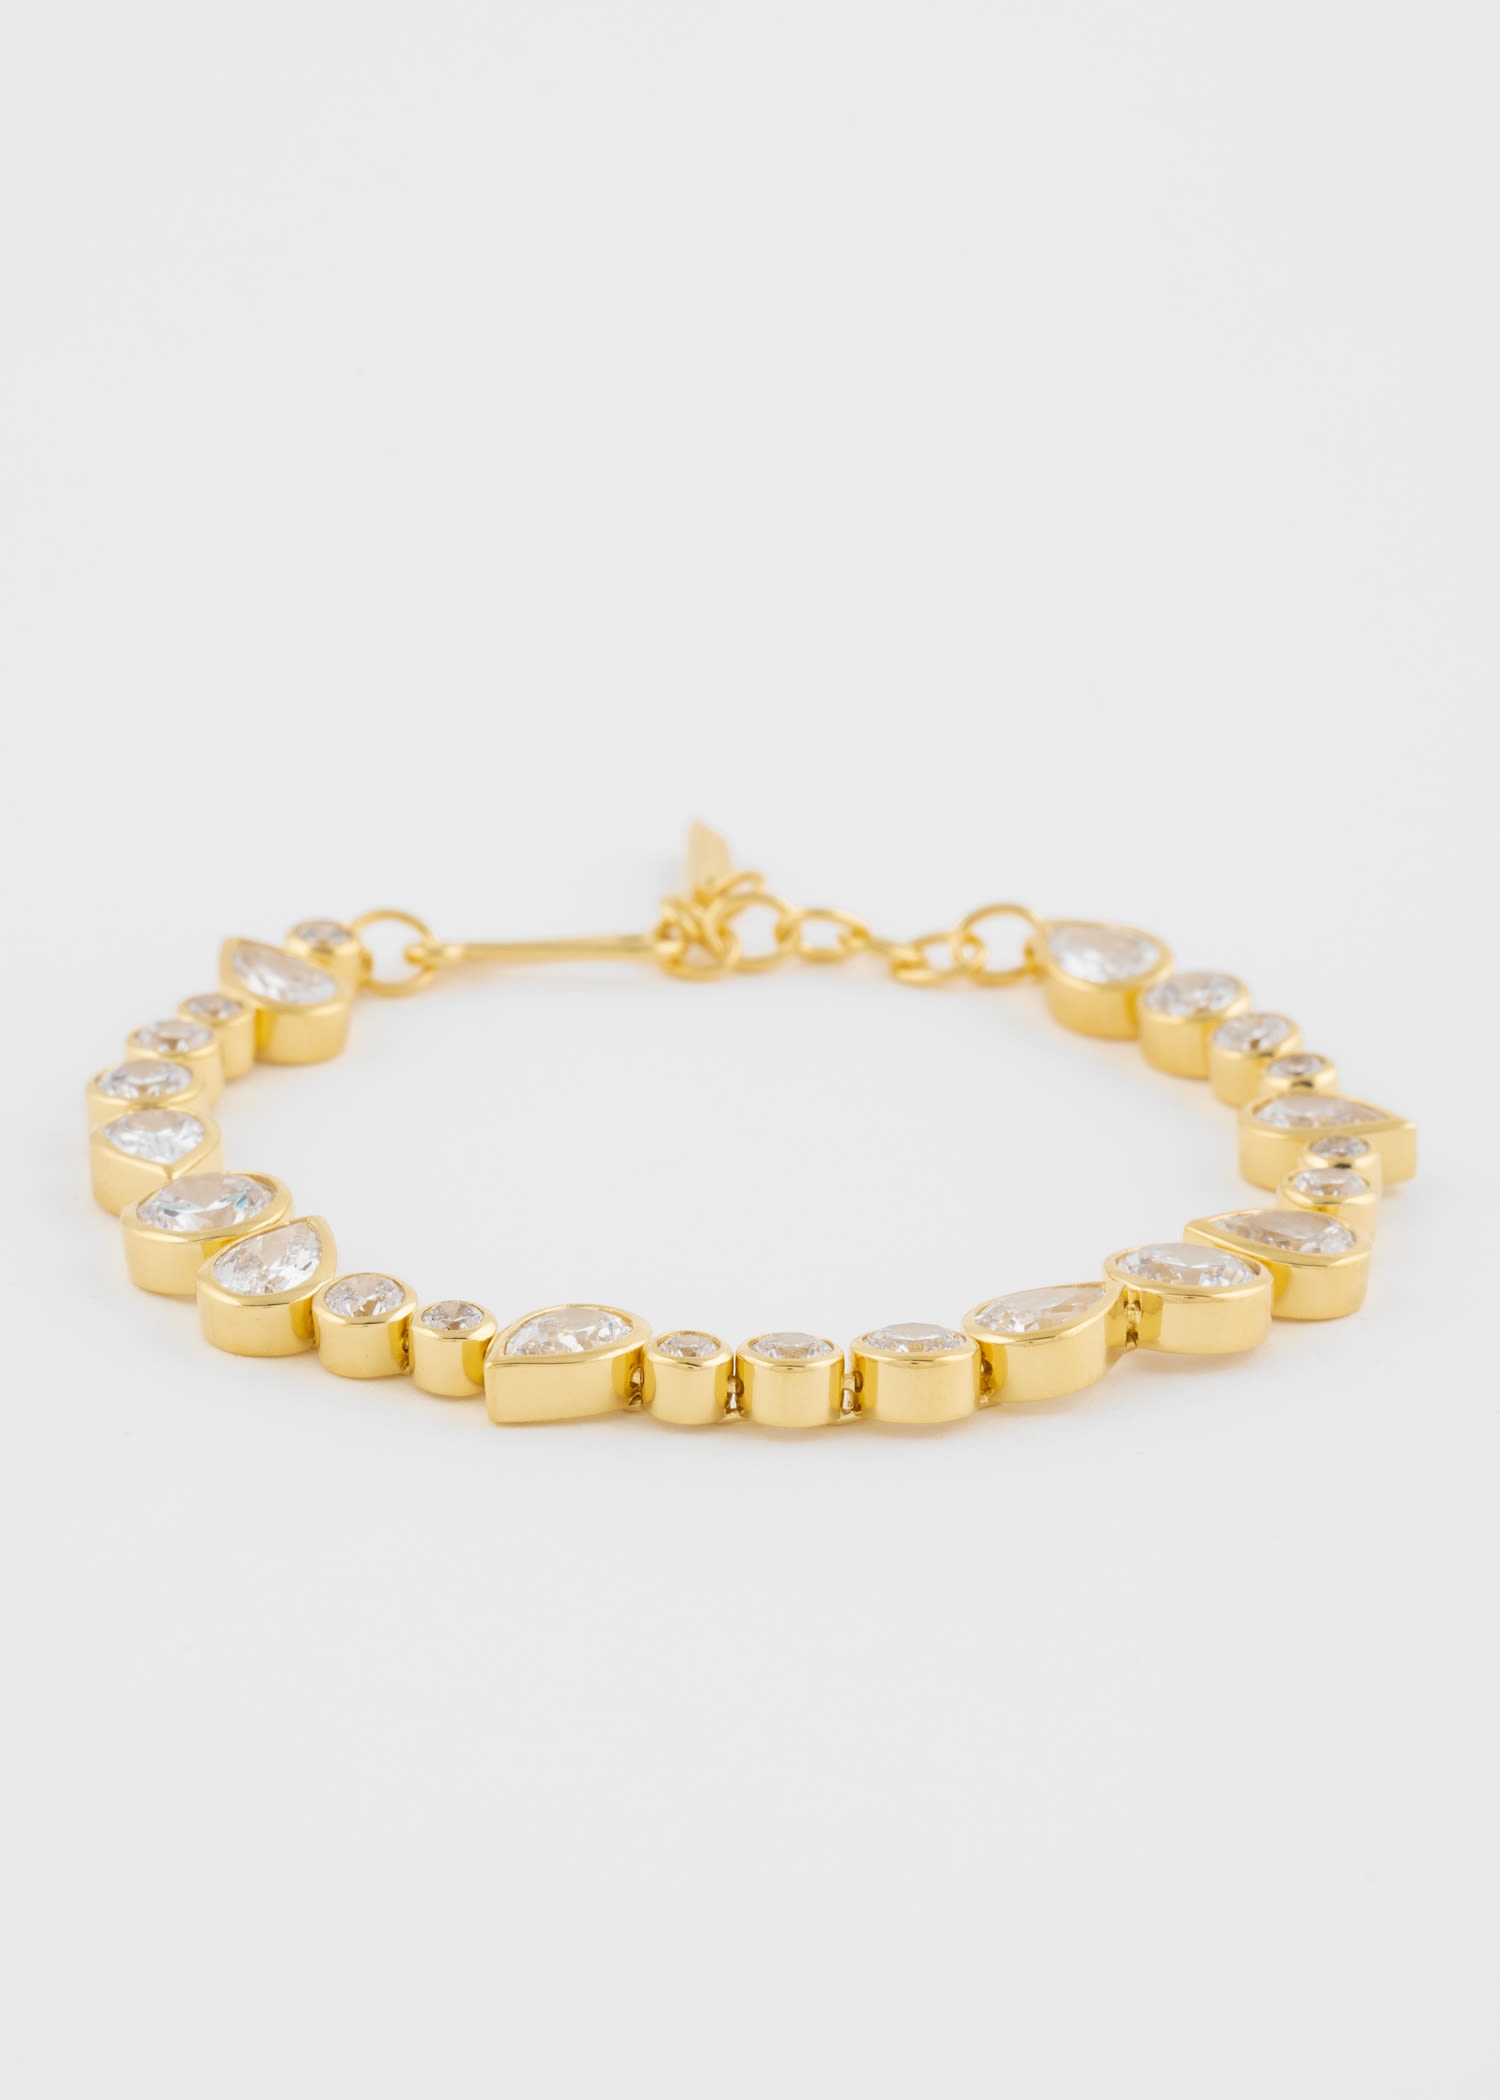 Cubic Zirconia and Gold Vermeil Bracelet by Completedworks - 2